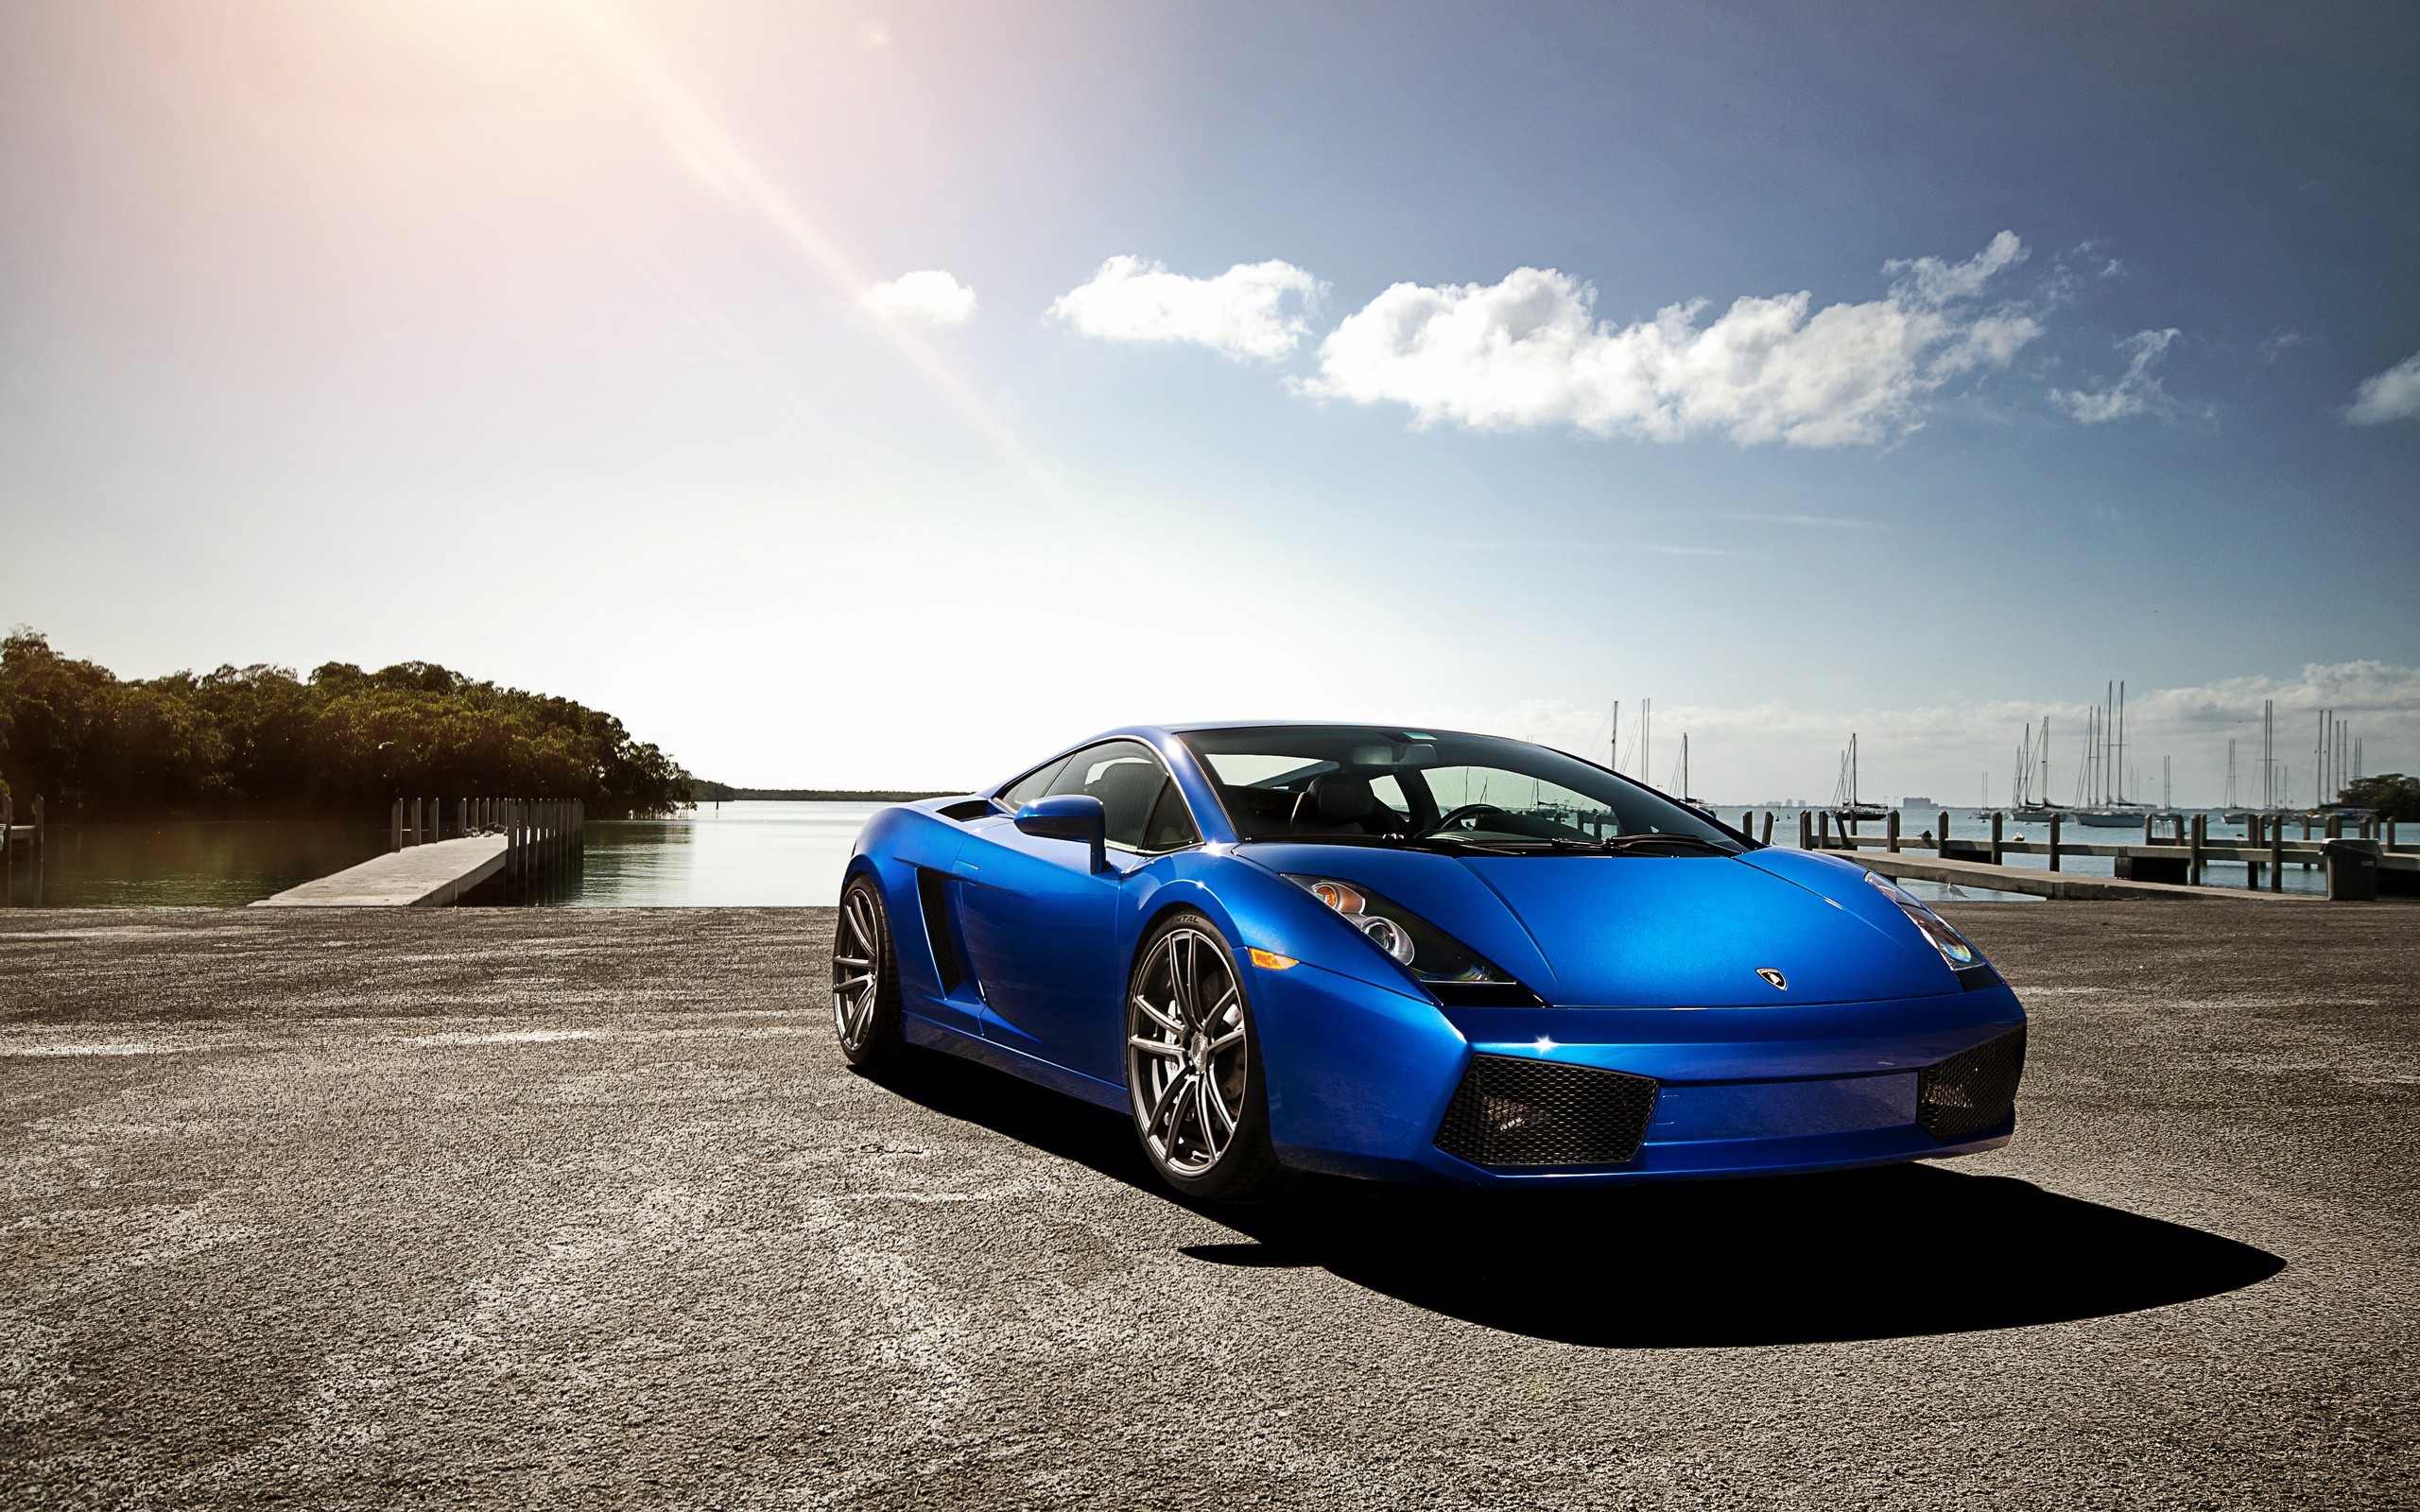 2560x1600 Desktop Hd Sports Car S On Free Wallpapers For Windows 8 Images Of